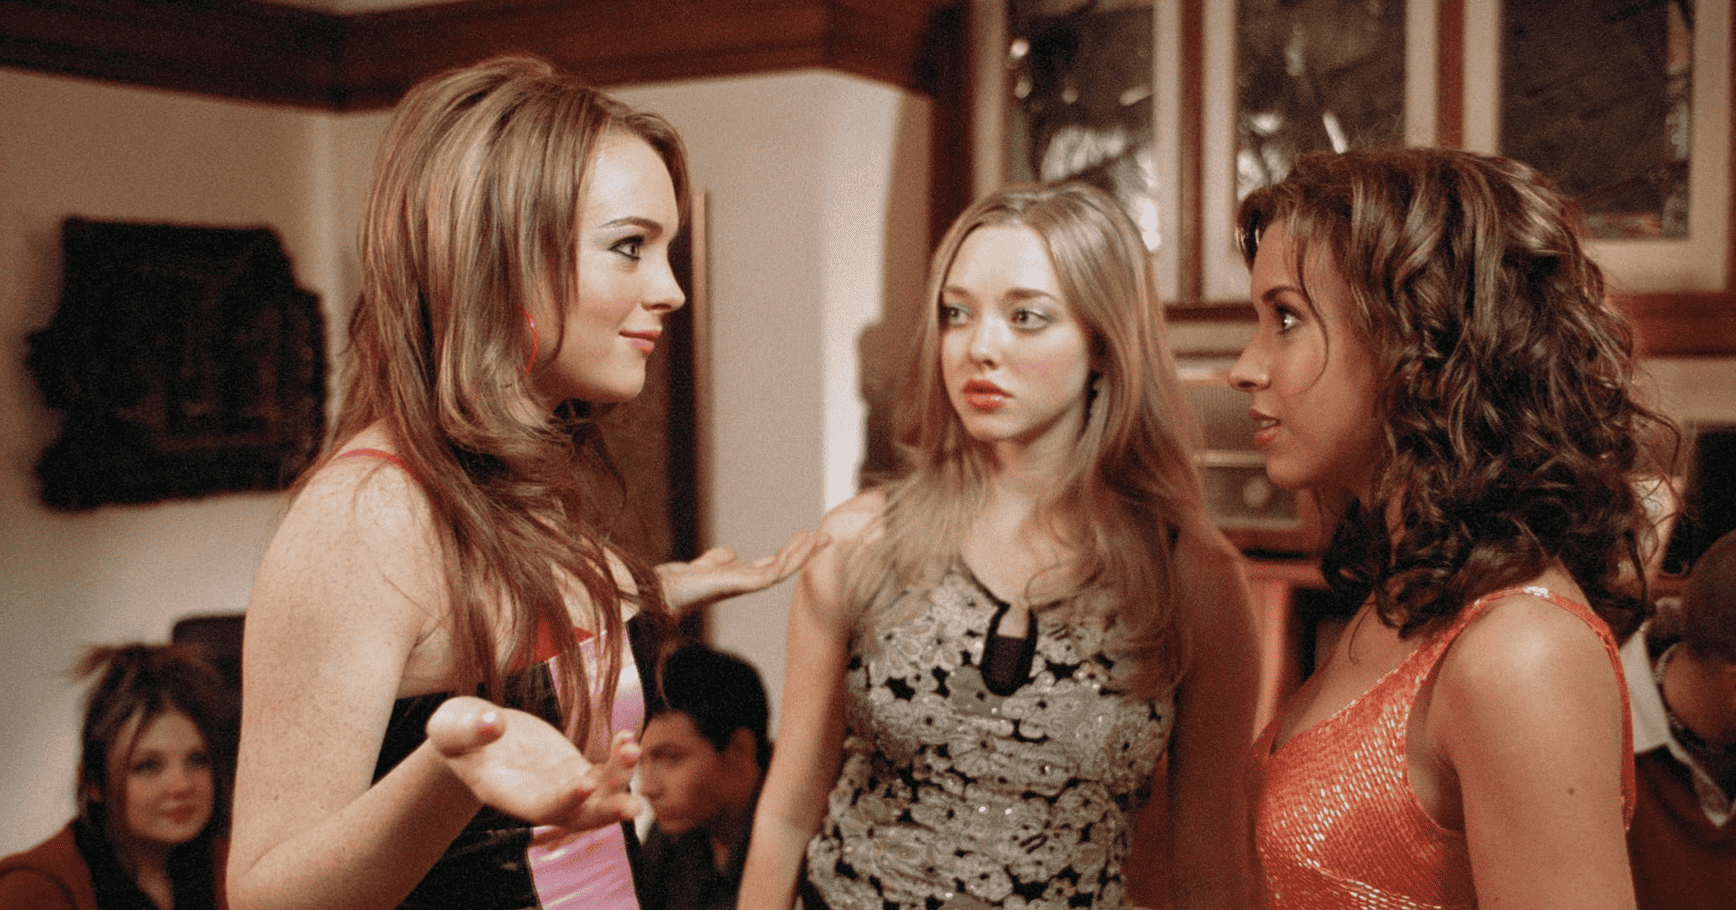 Cady, Karen, and Gretchen standing together at a Halloween house party in this image from Paramount Pictures.